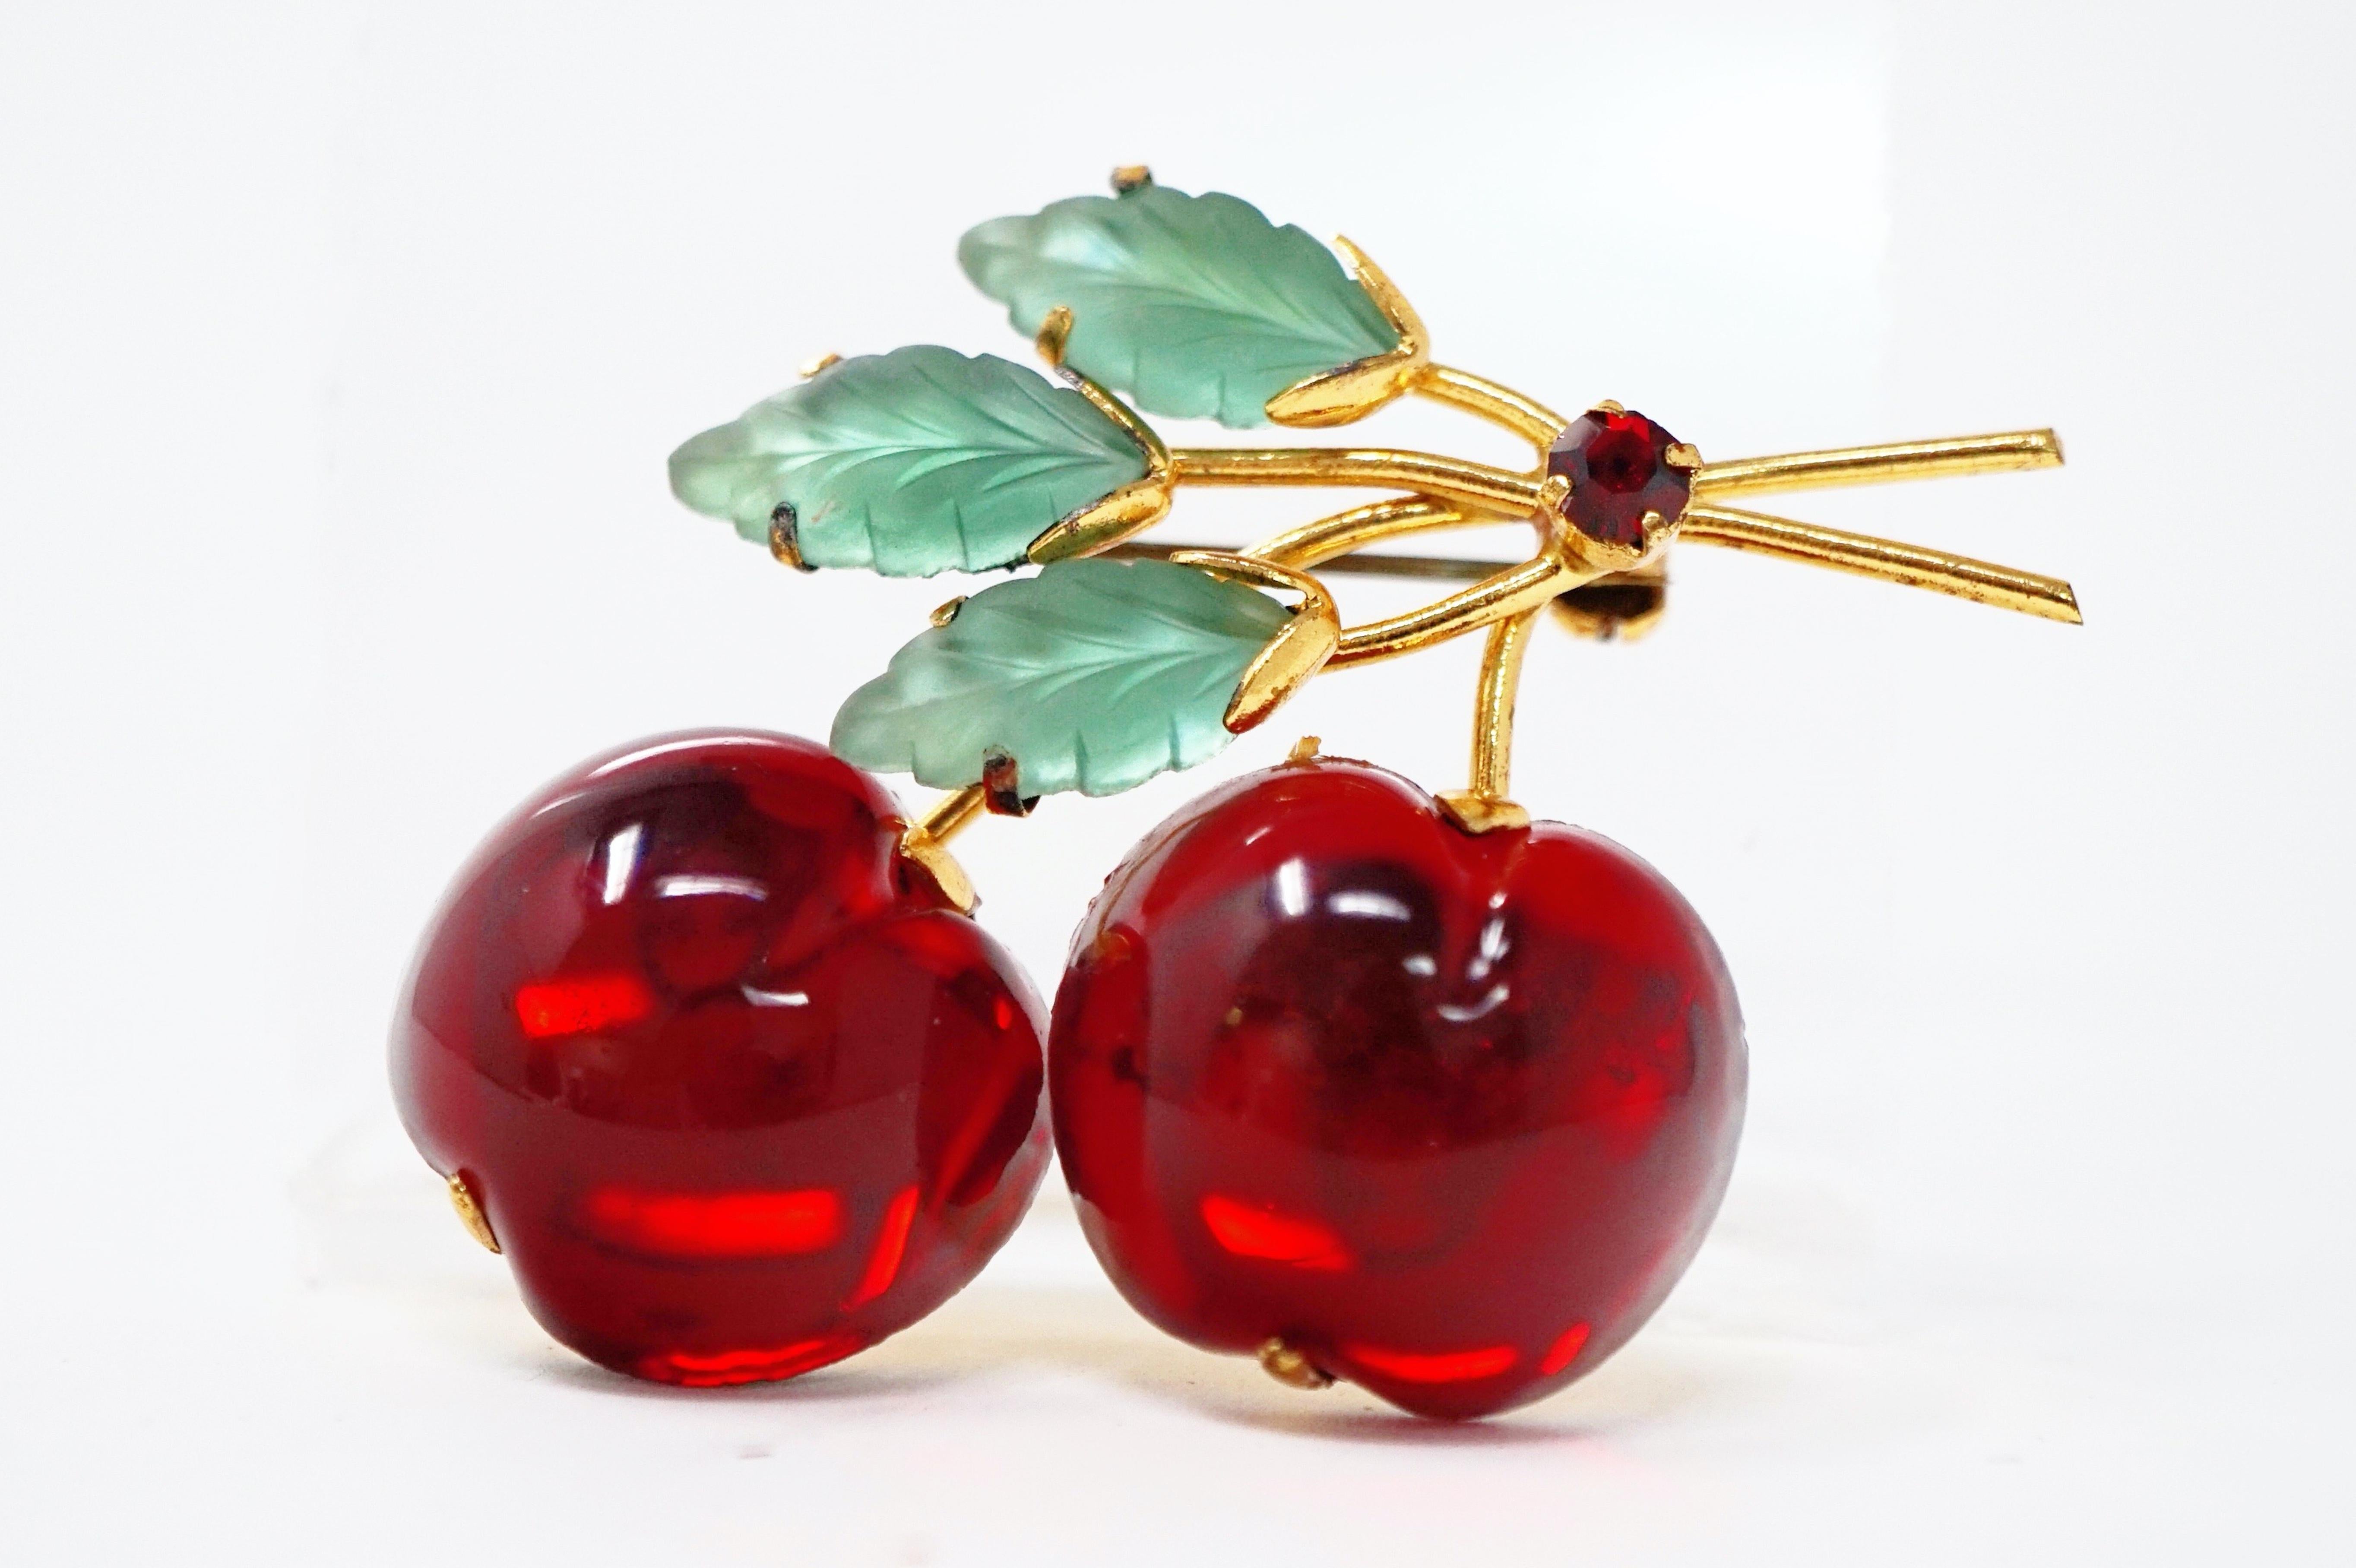 Adorable Gold and Red Double Cherries Fruit Shaped Rhinestone PinBrooch